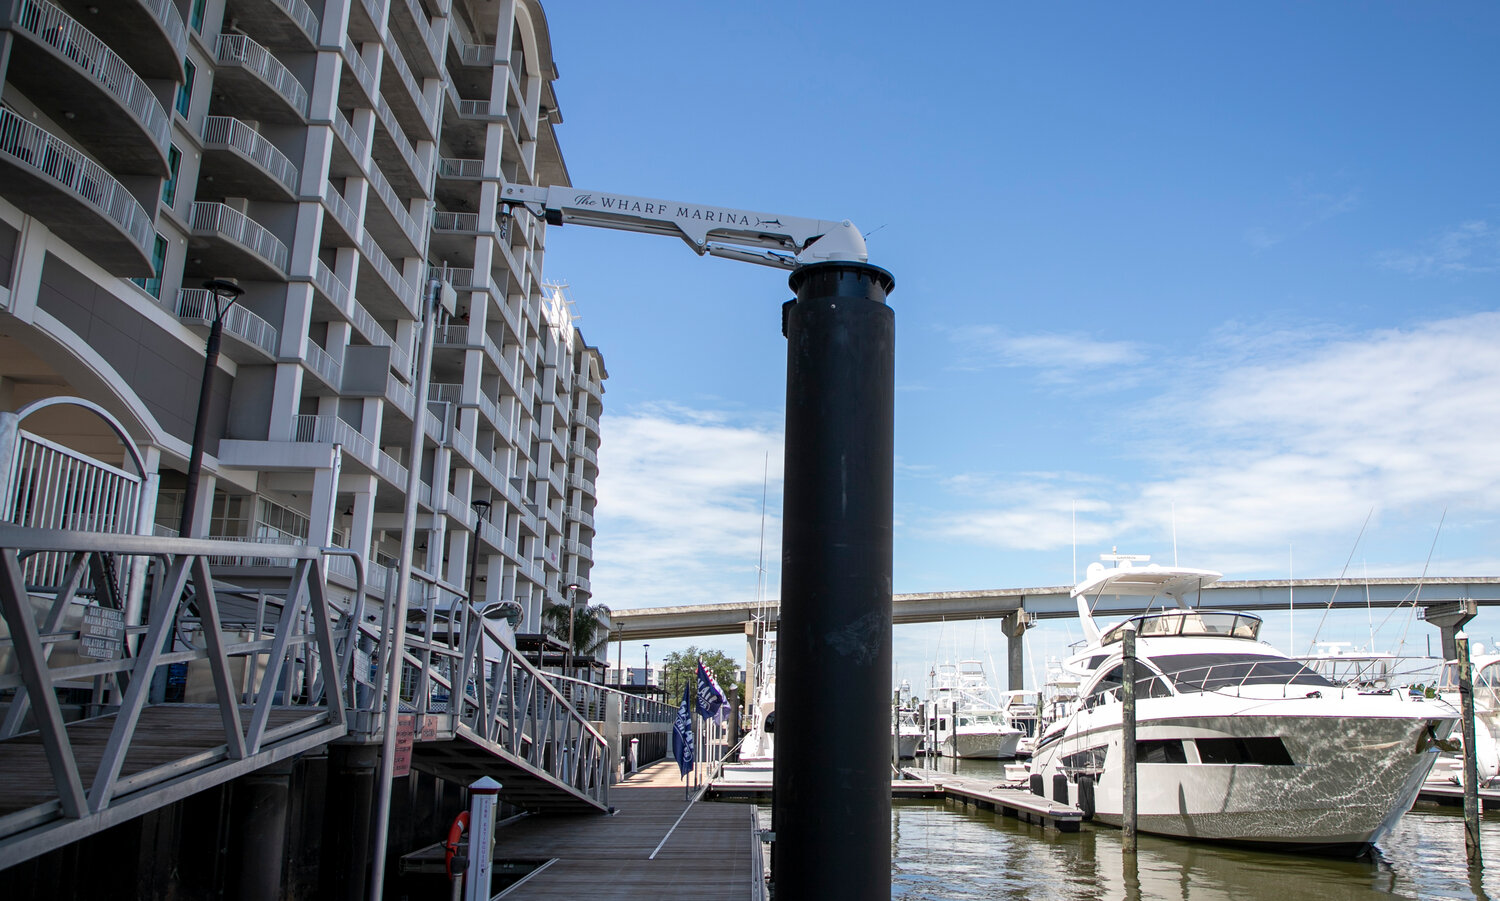 The docks at The Wharf Marina now sport a billfish crane to assist fishermen in retrieving their big hauls from the Gulf.